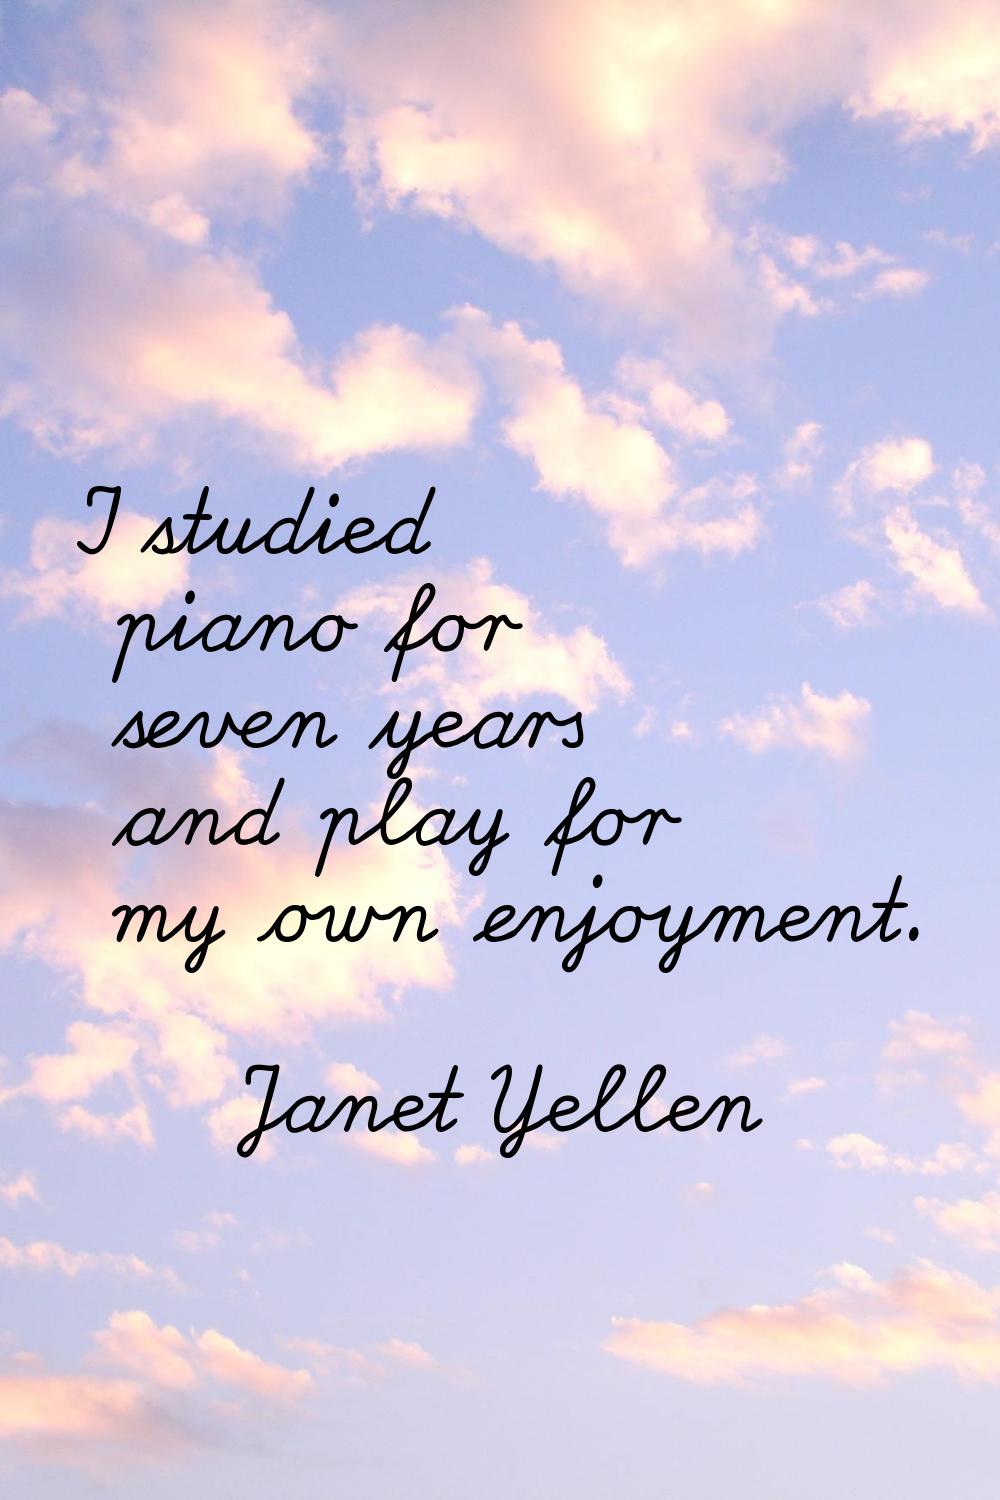 I studied piano for seven years and play for my own enjoyment.